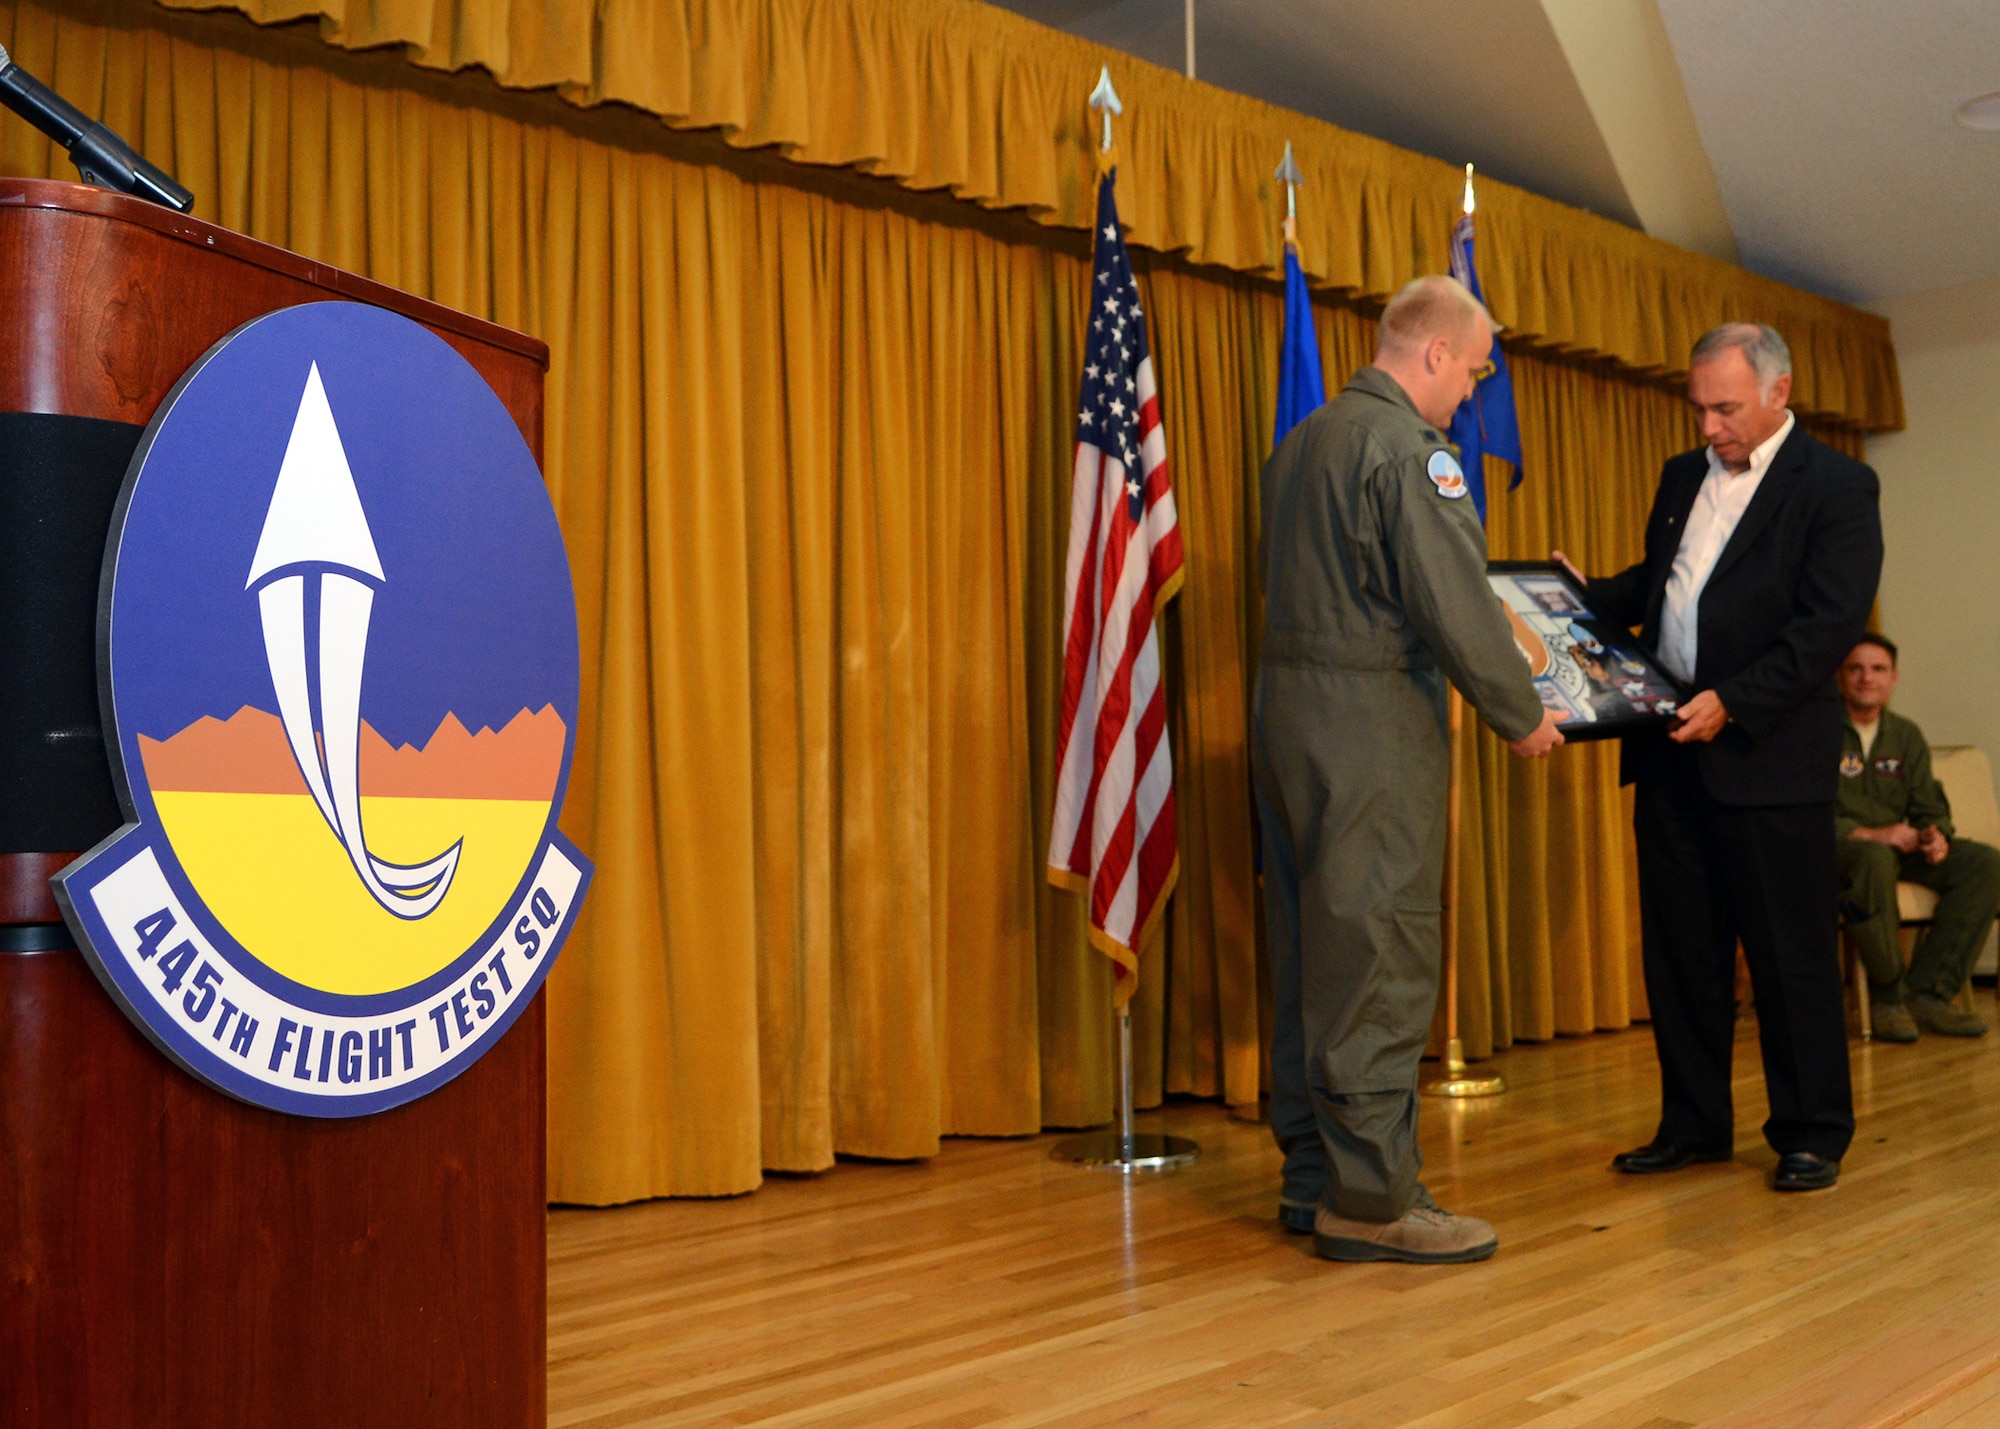 During the 445th Flight Test Squadron inactivation ceremony, Lt. Col. Darren Wees (left), 445th FLTS commander, can be seen presenting retired Lt. Col. Troy Fontaine, former 445th FLTS commander, with a squadron memento on May 1 at Club Muroc. The memento was given to Fontaine in honor of the squadron he stood up in 2002. The 445th Flight Test Squadron has been consolidated into three other Combined Test Forces. (U.S. Air Force photo by Jet Fabara)